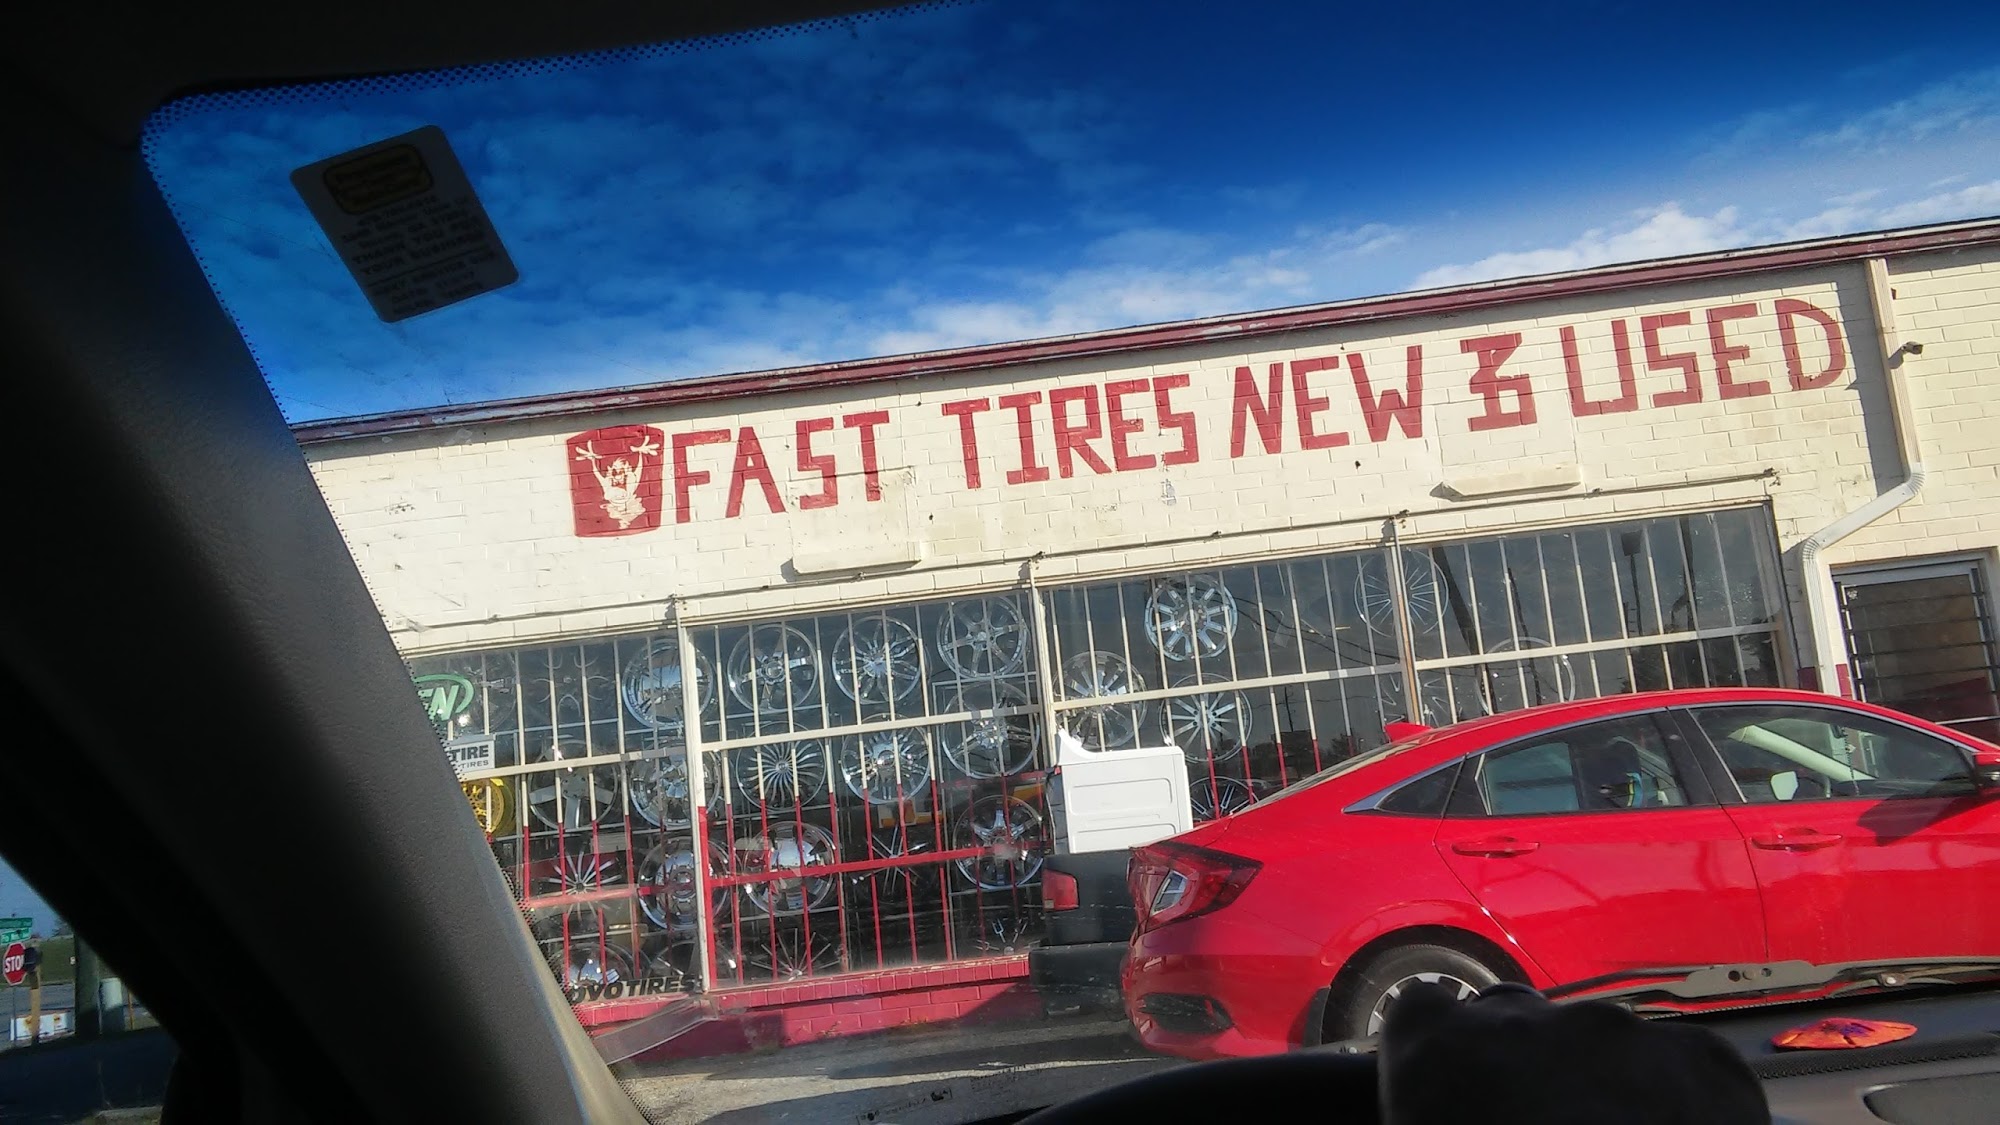 Fast Tires